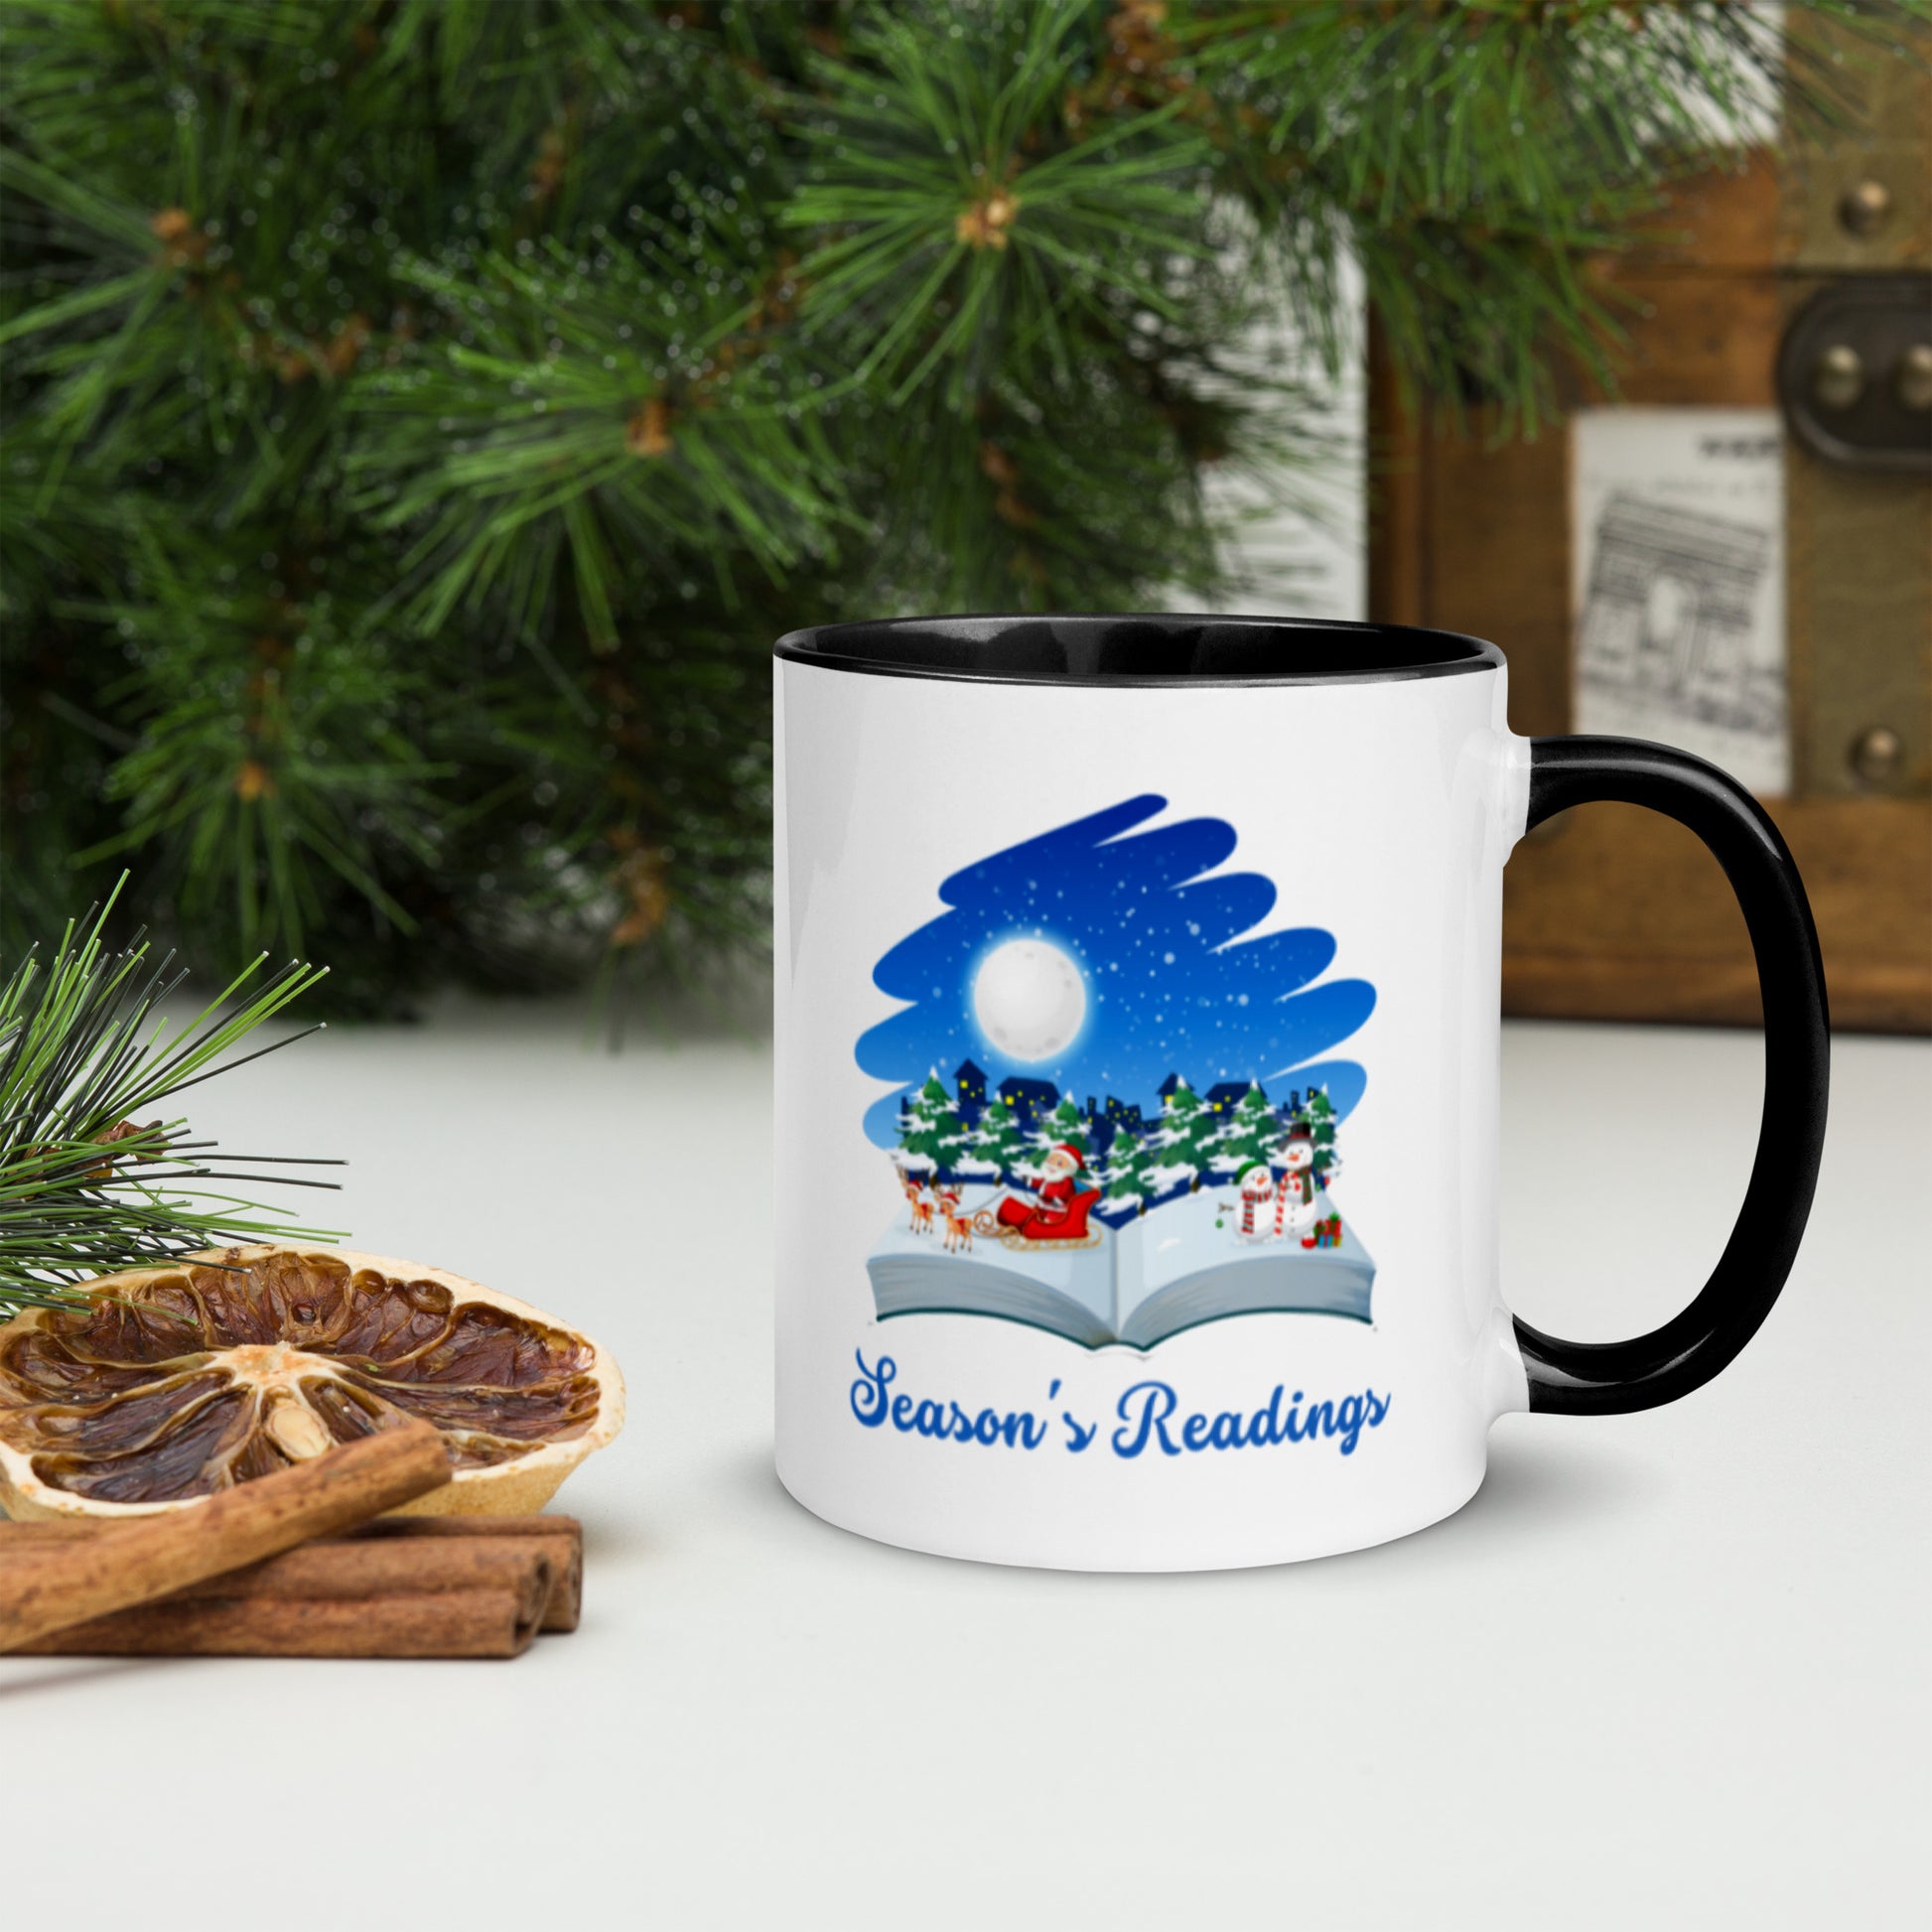 Season's Readings Mug with Color Inside-11oz. - The Spinster Librarian Shop